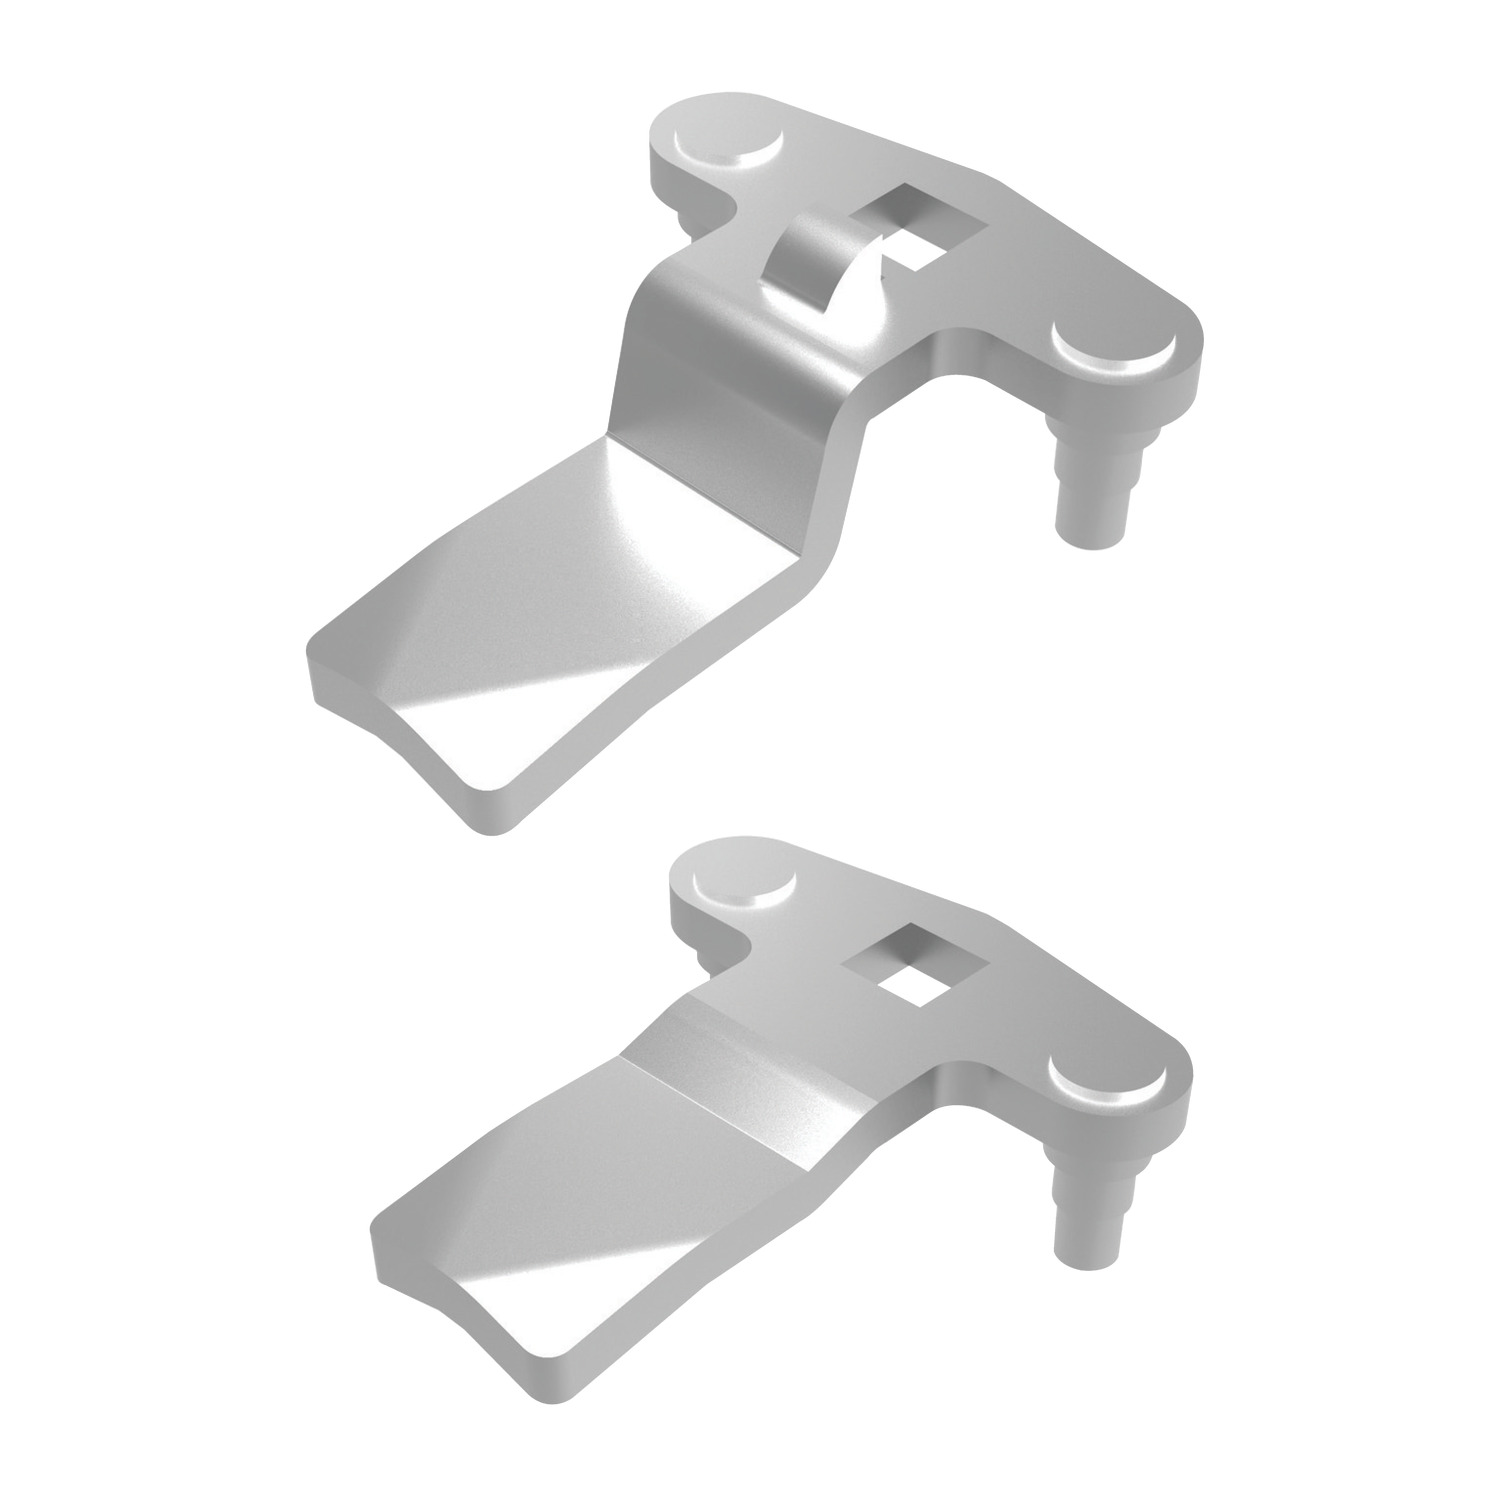 A0240.AW0160 Two Point Cams Flexi for 3-point latching - Steel, zinc plated - Without Projection